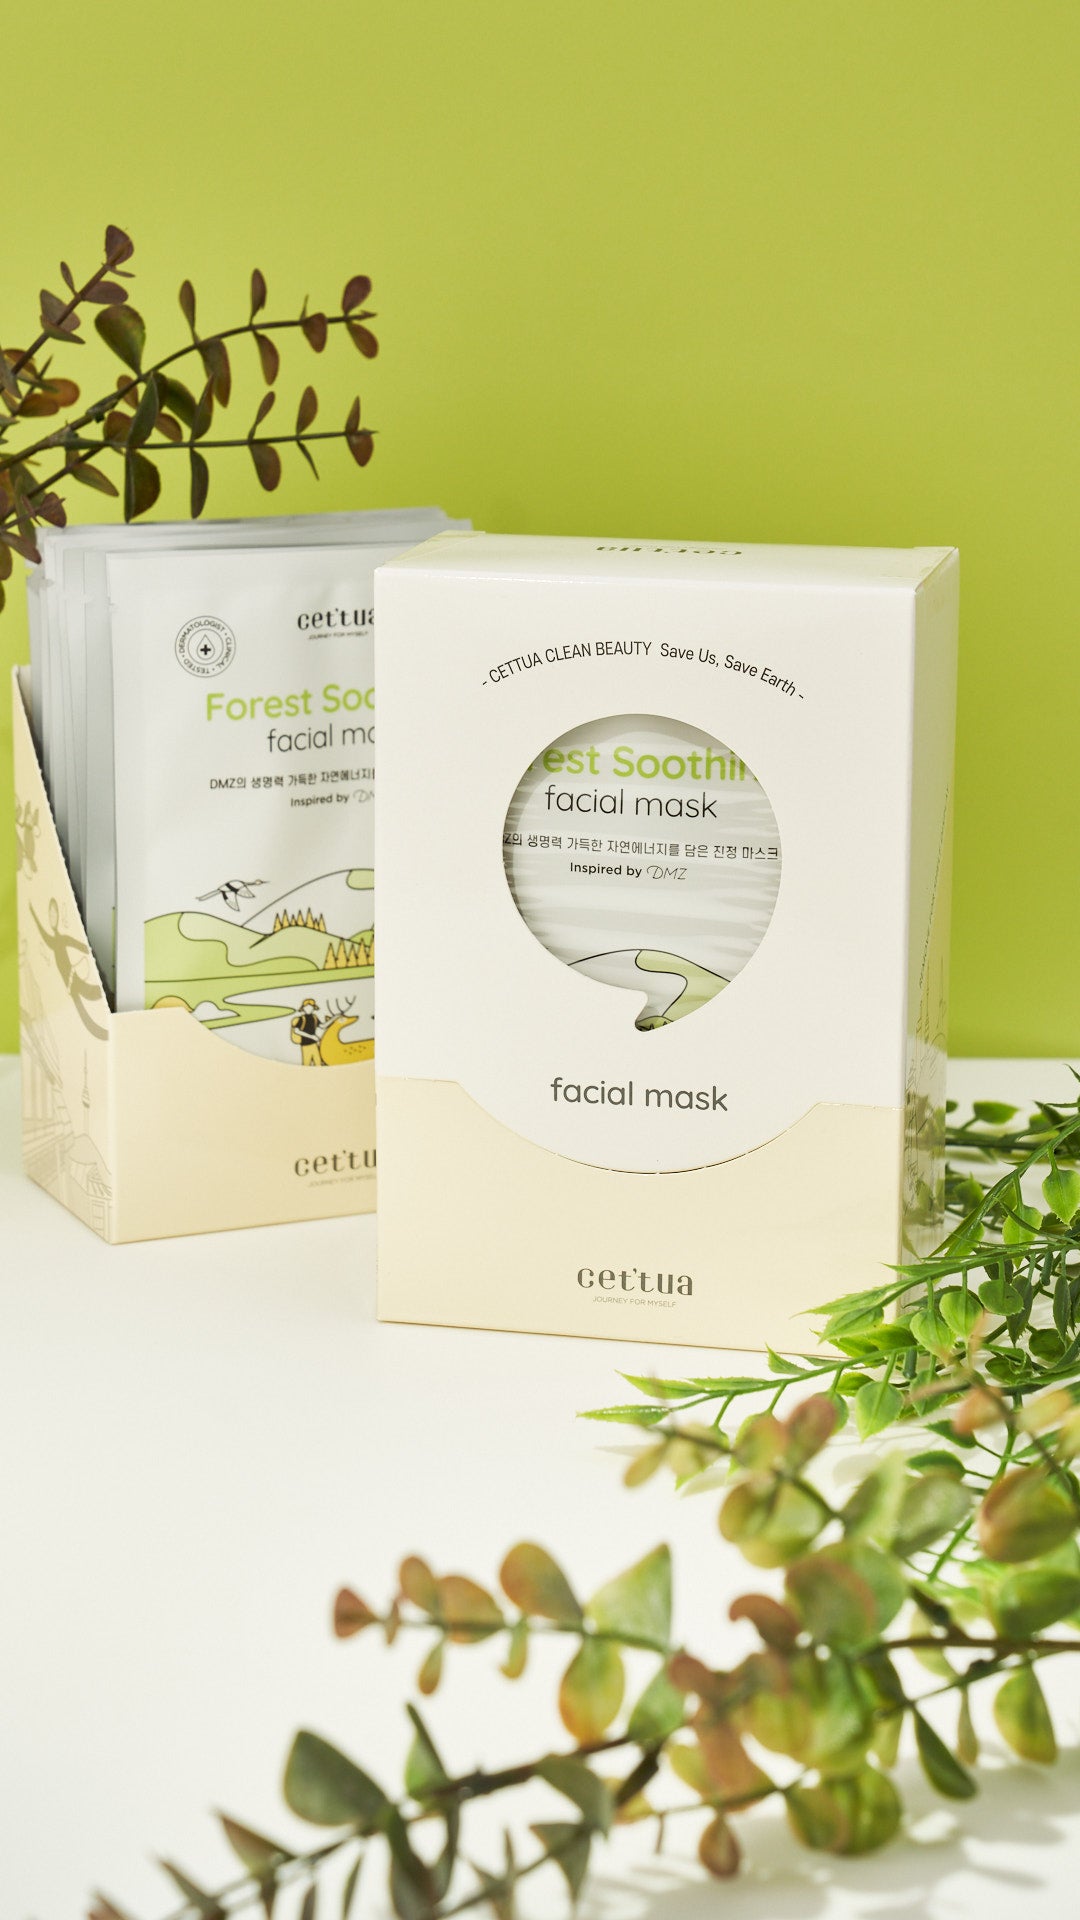 Cettua Forest Soothing Facial Mask